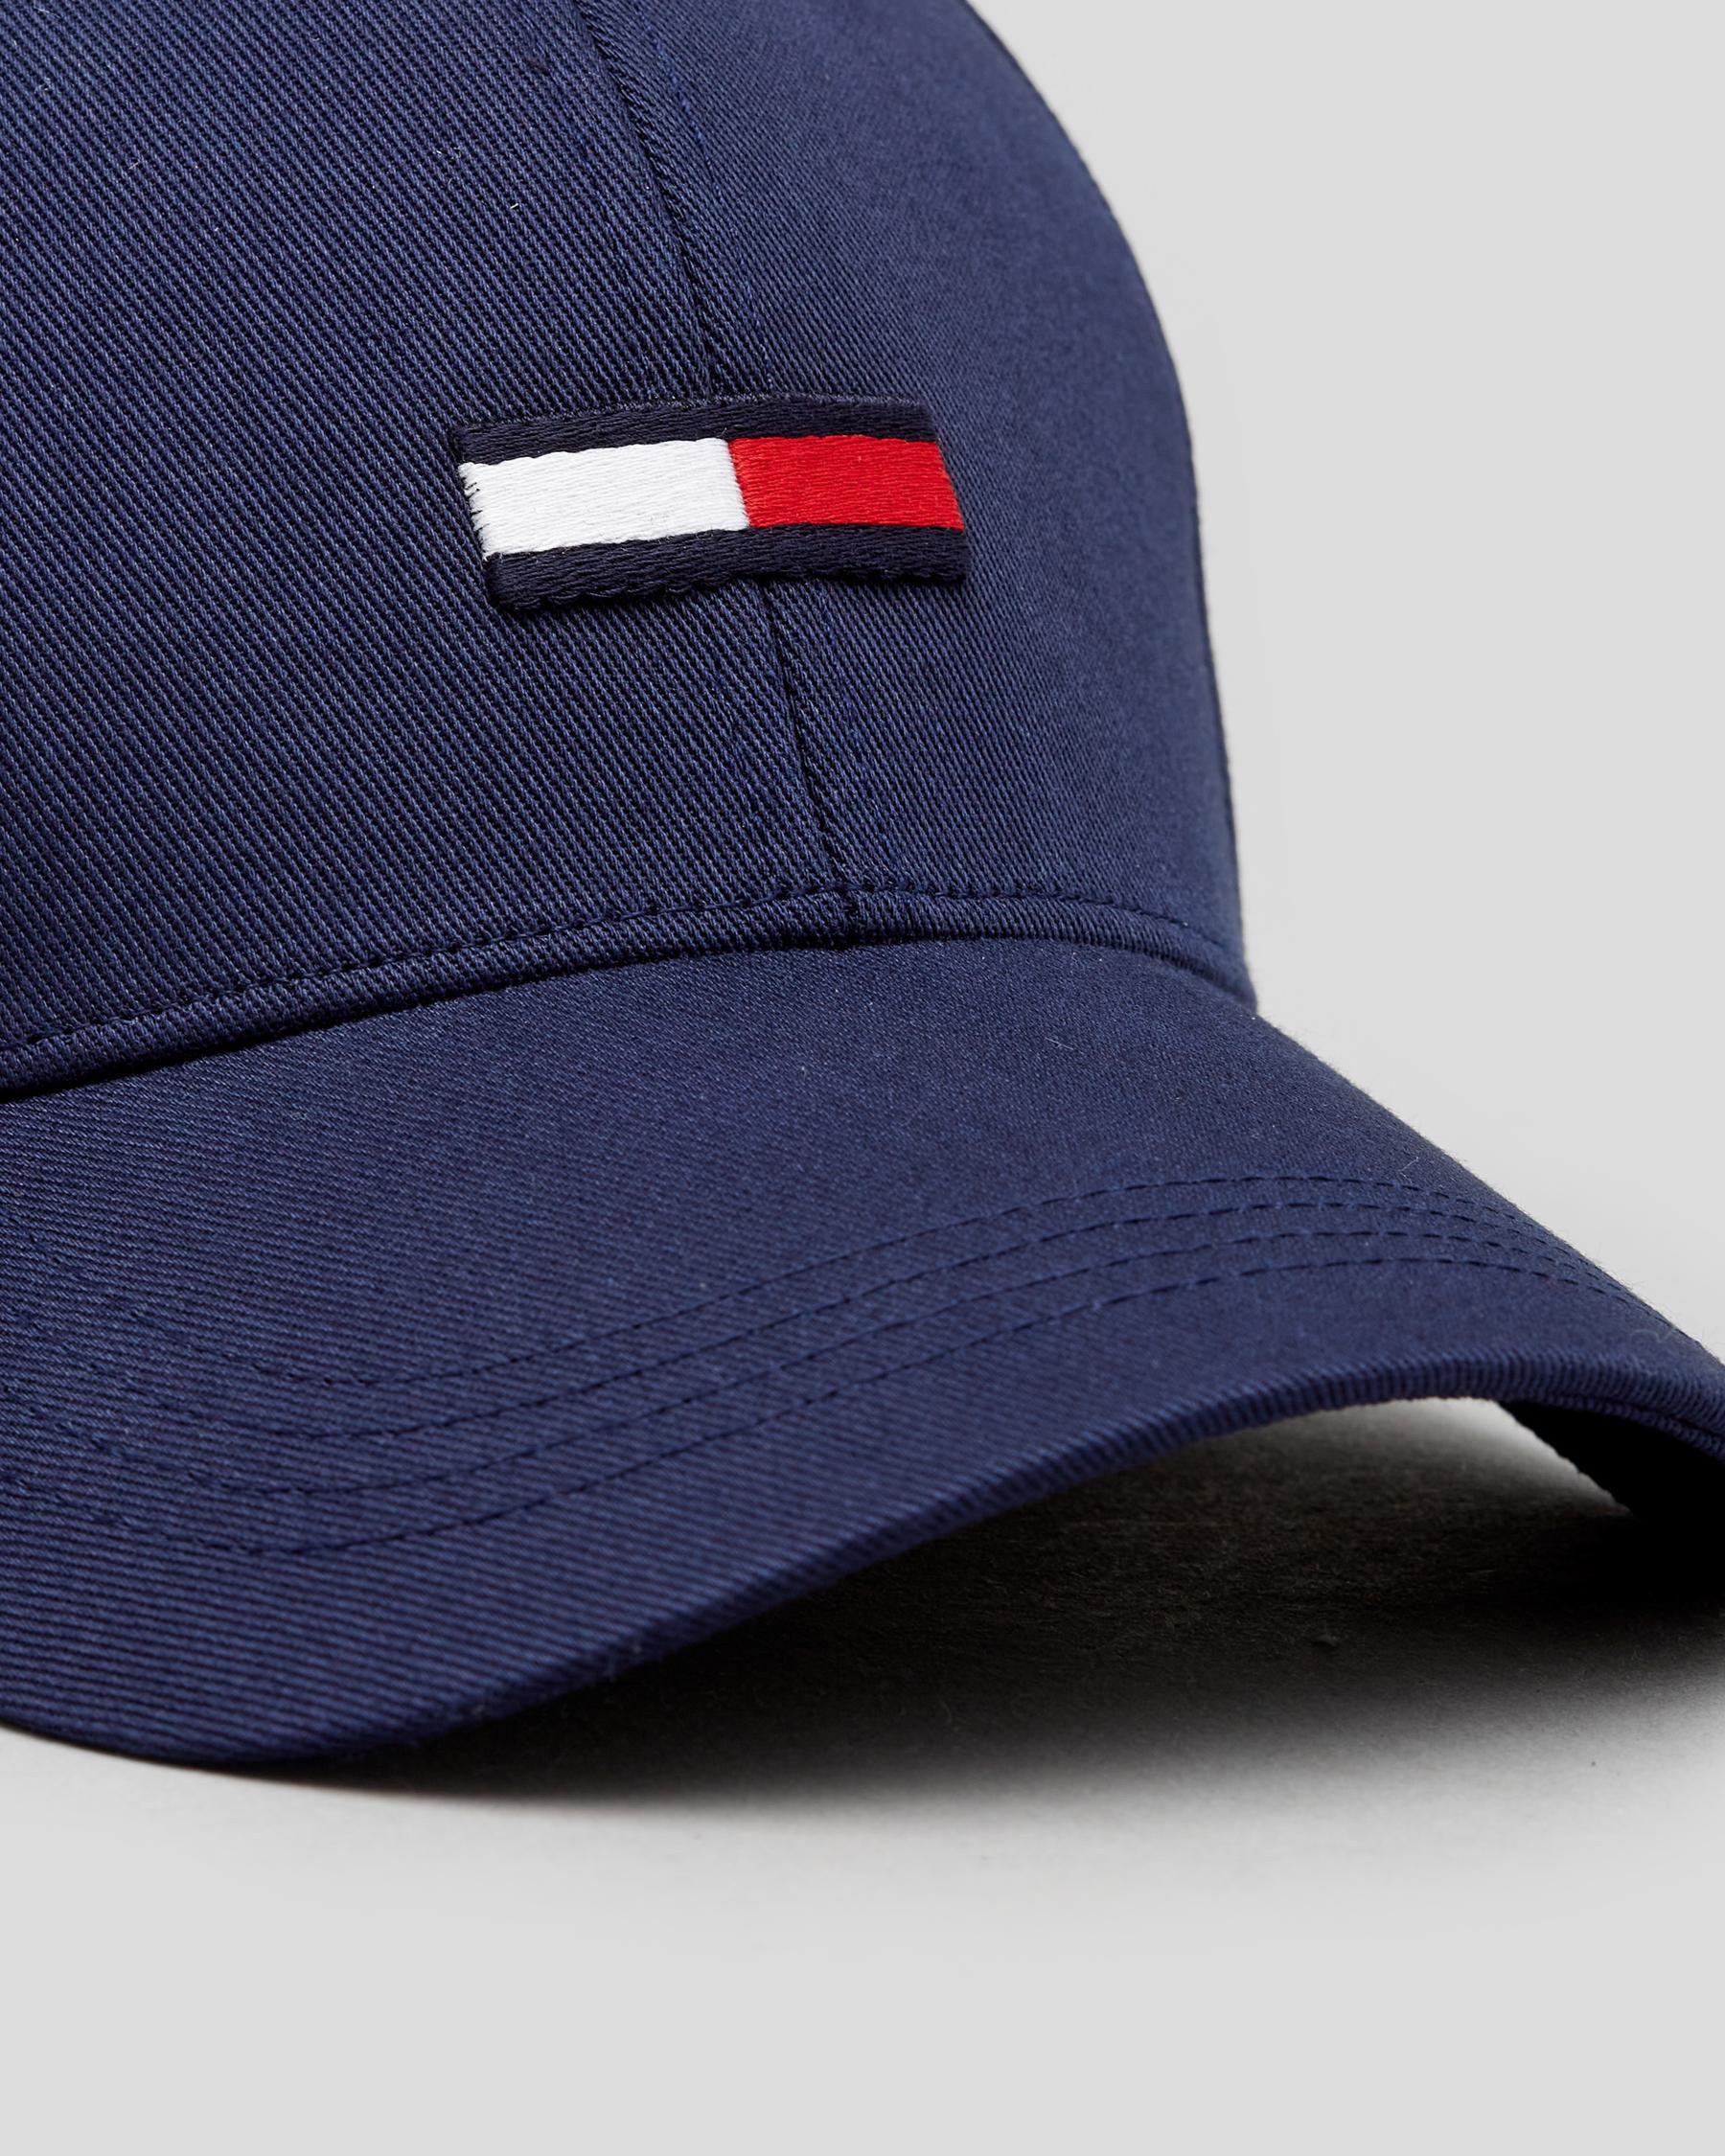 Tommy Hilfiger TJM Flag City - Shipping FREE* Twilight Cap - Navy In Easy United Beach Returns & States